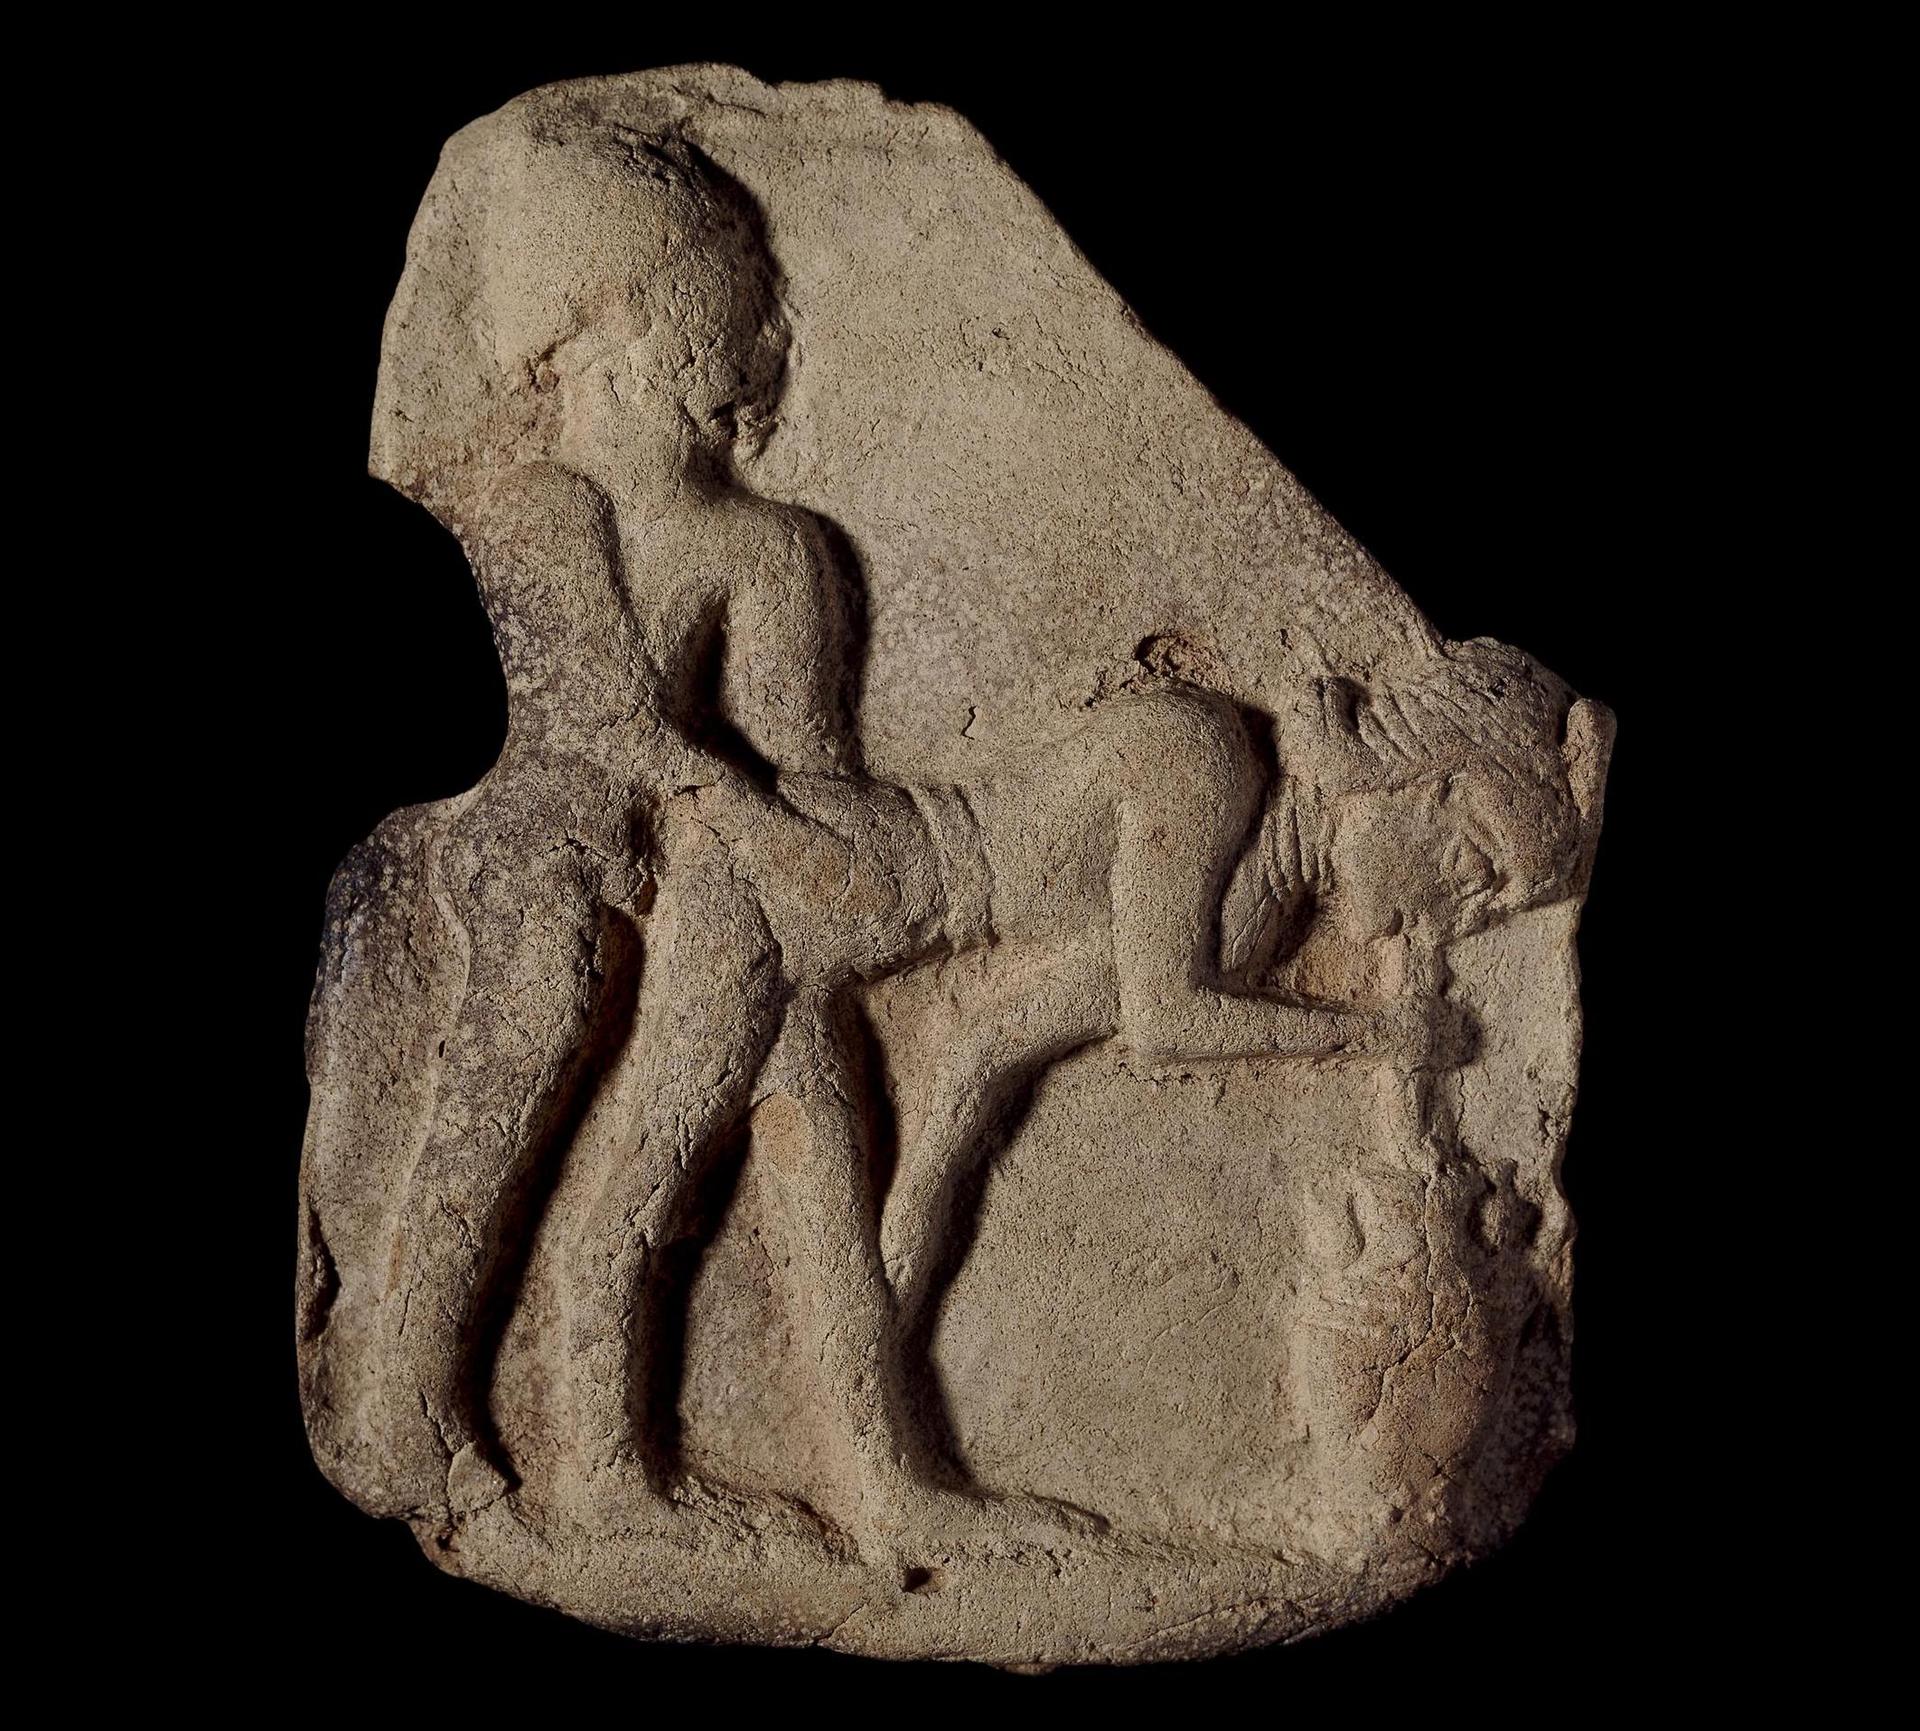 A stone carving of two people.